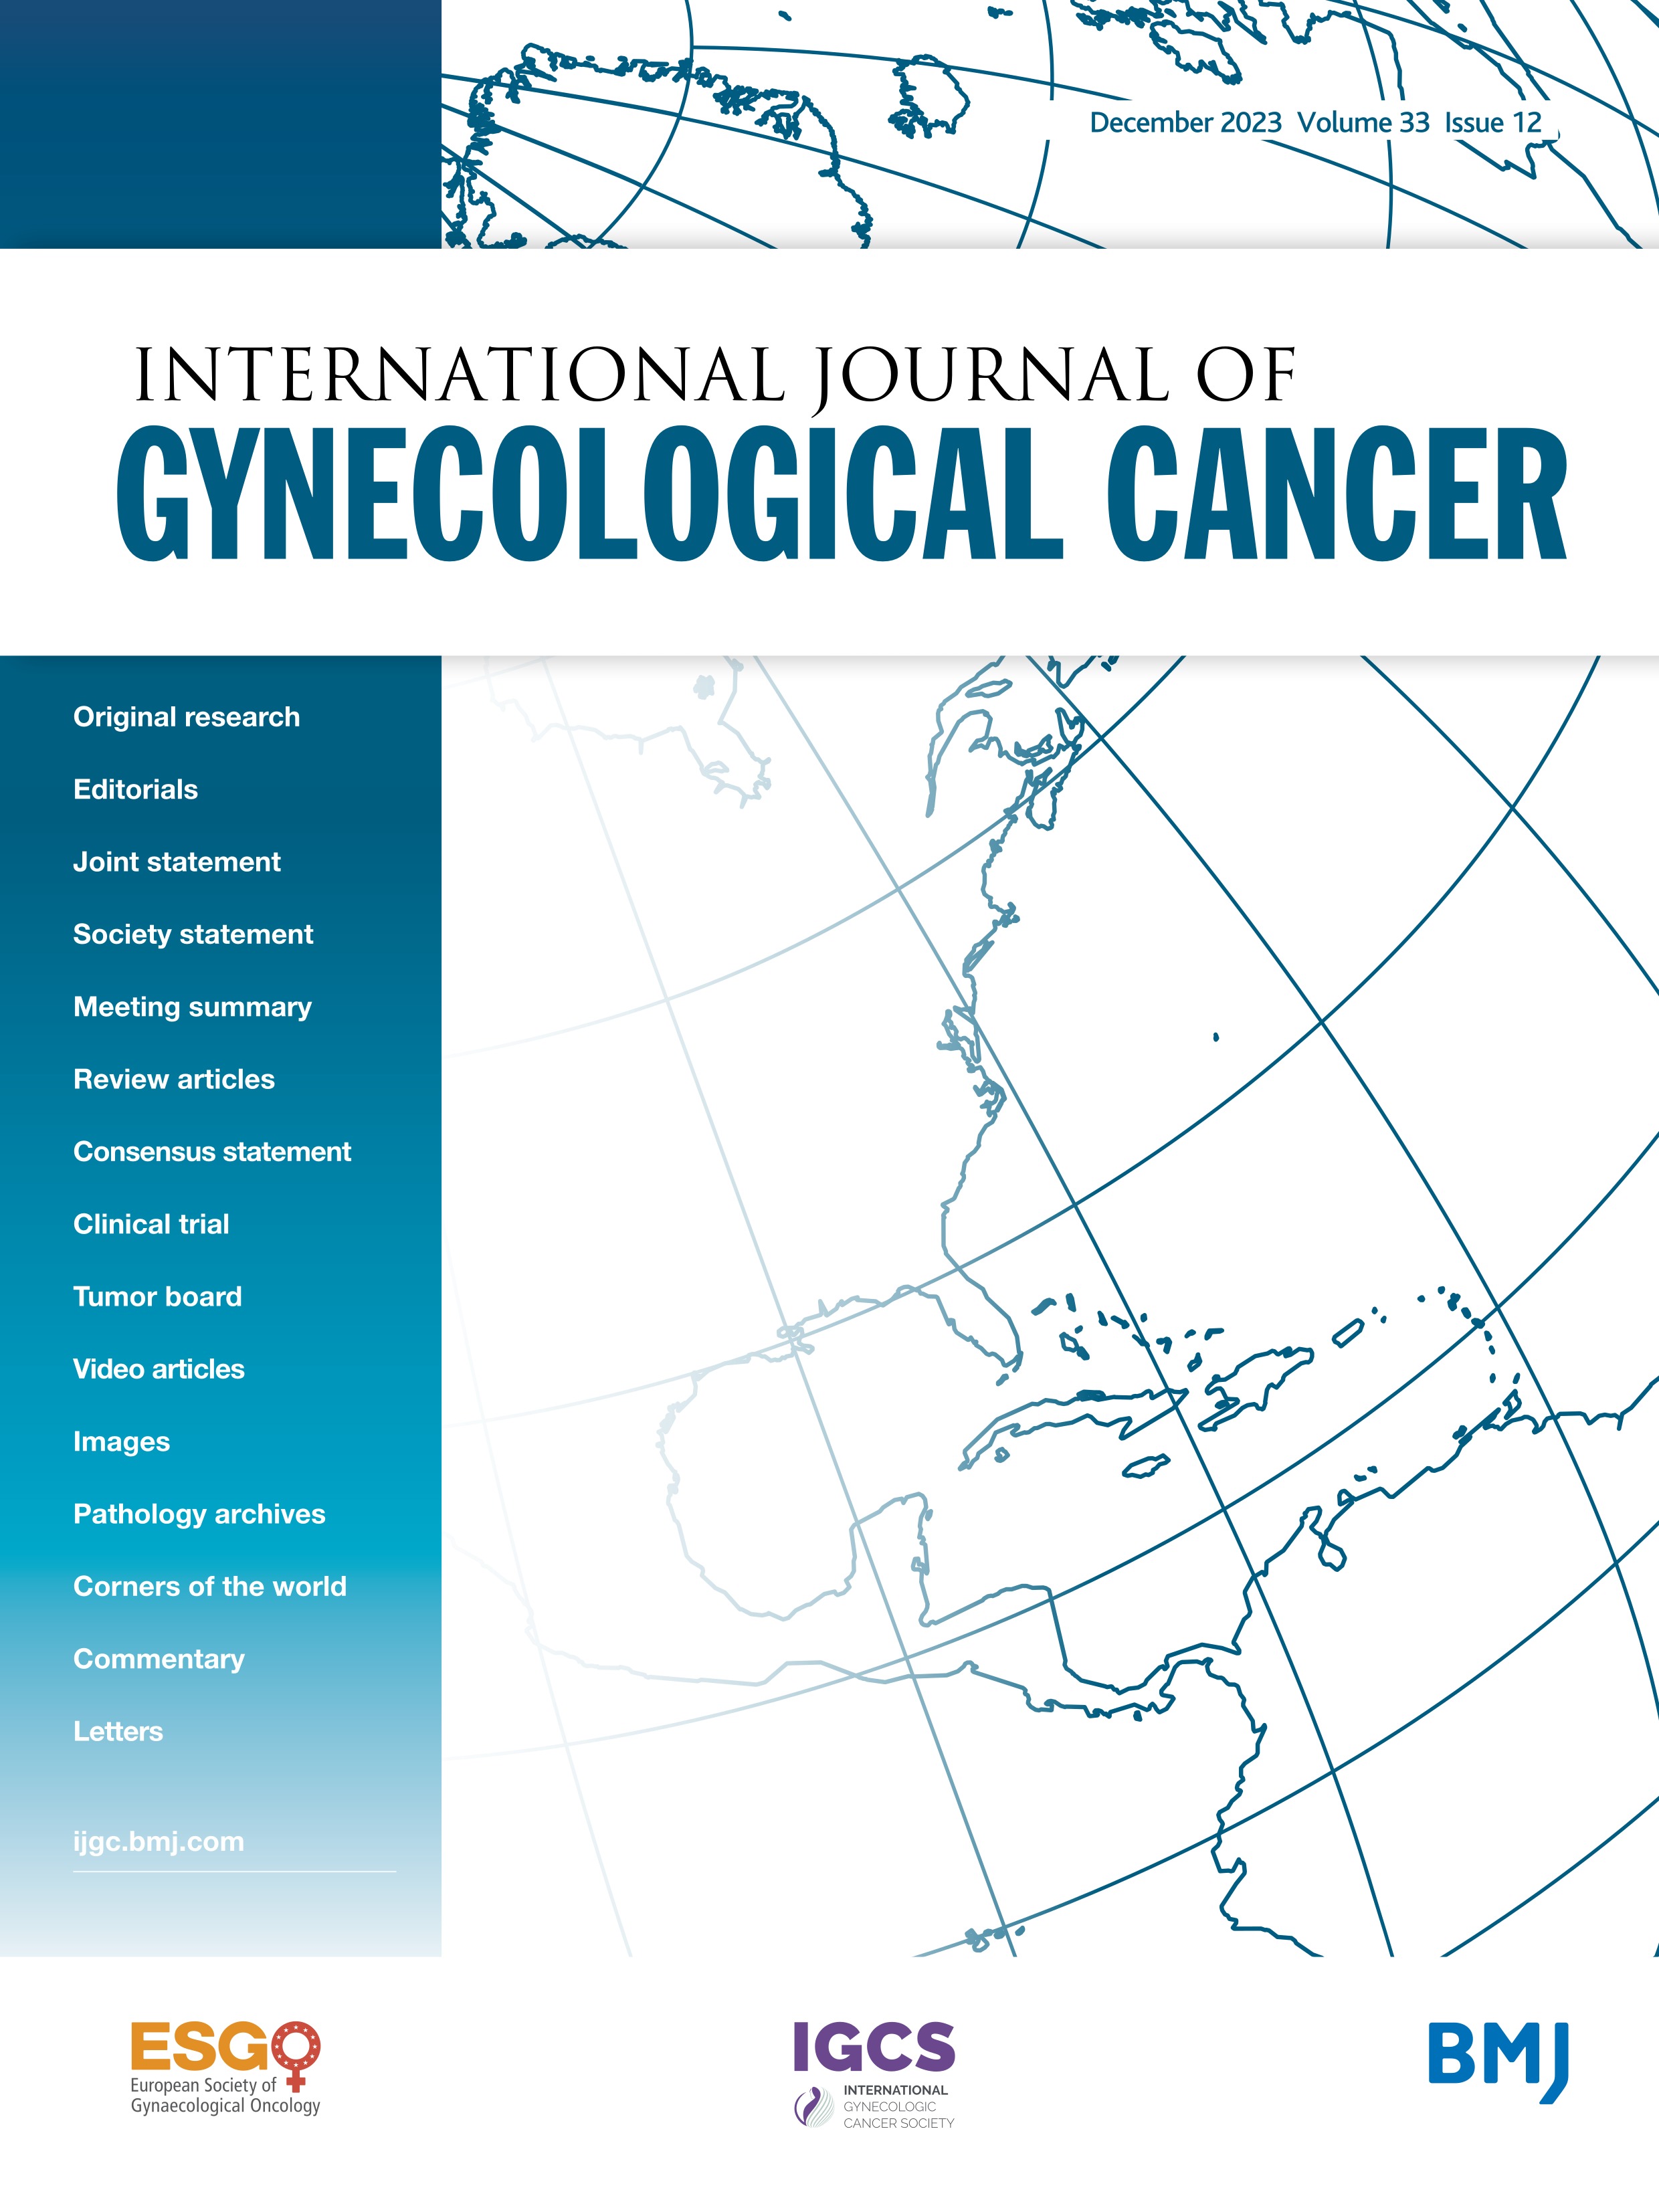 Efficacy and safety of zimberelimab (GLS-010) monotherapy in patients with recurrent or metastatic cervical cancer: a multicenter, single-arm, phase II study